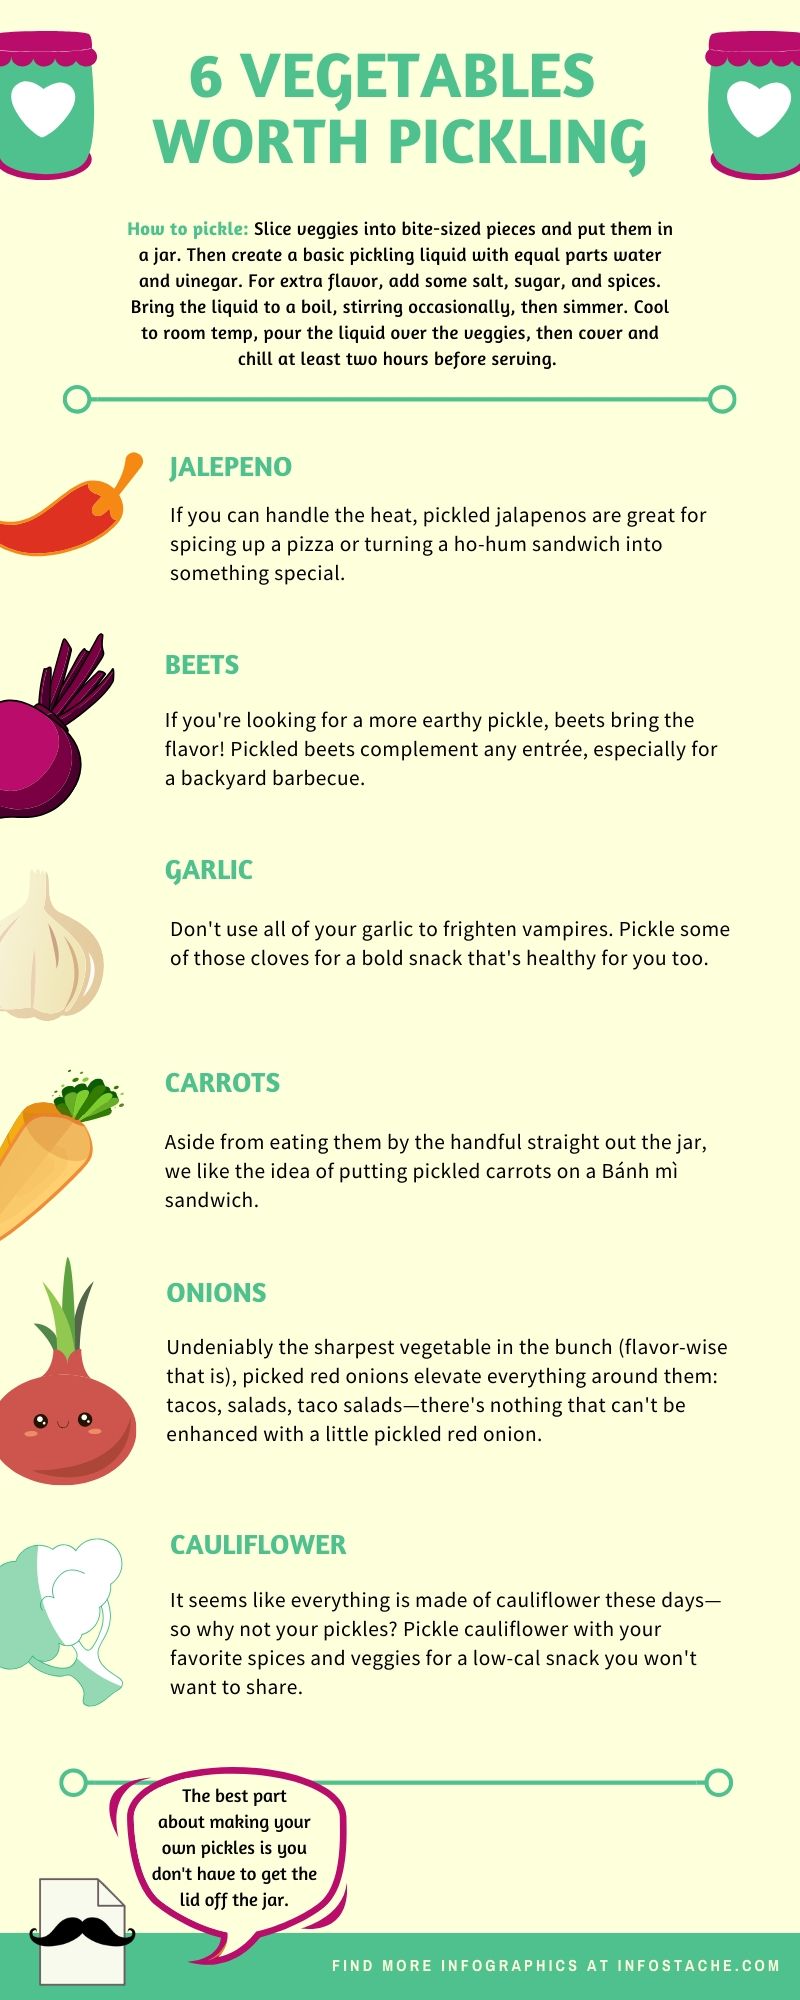 6 Vegetables Worth Pickling Infographic